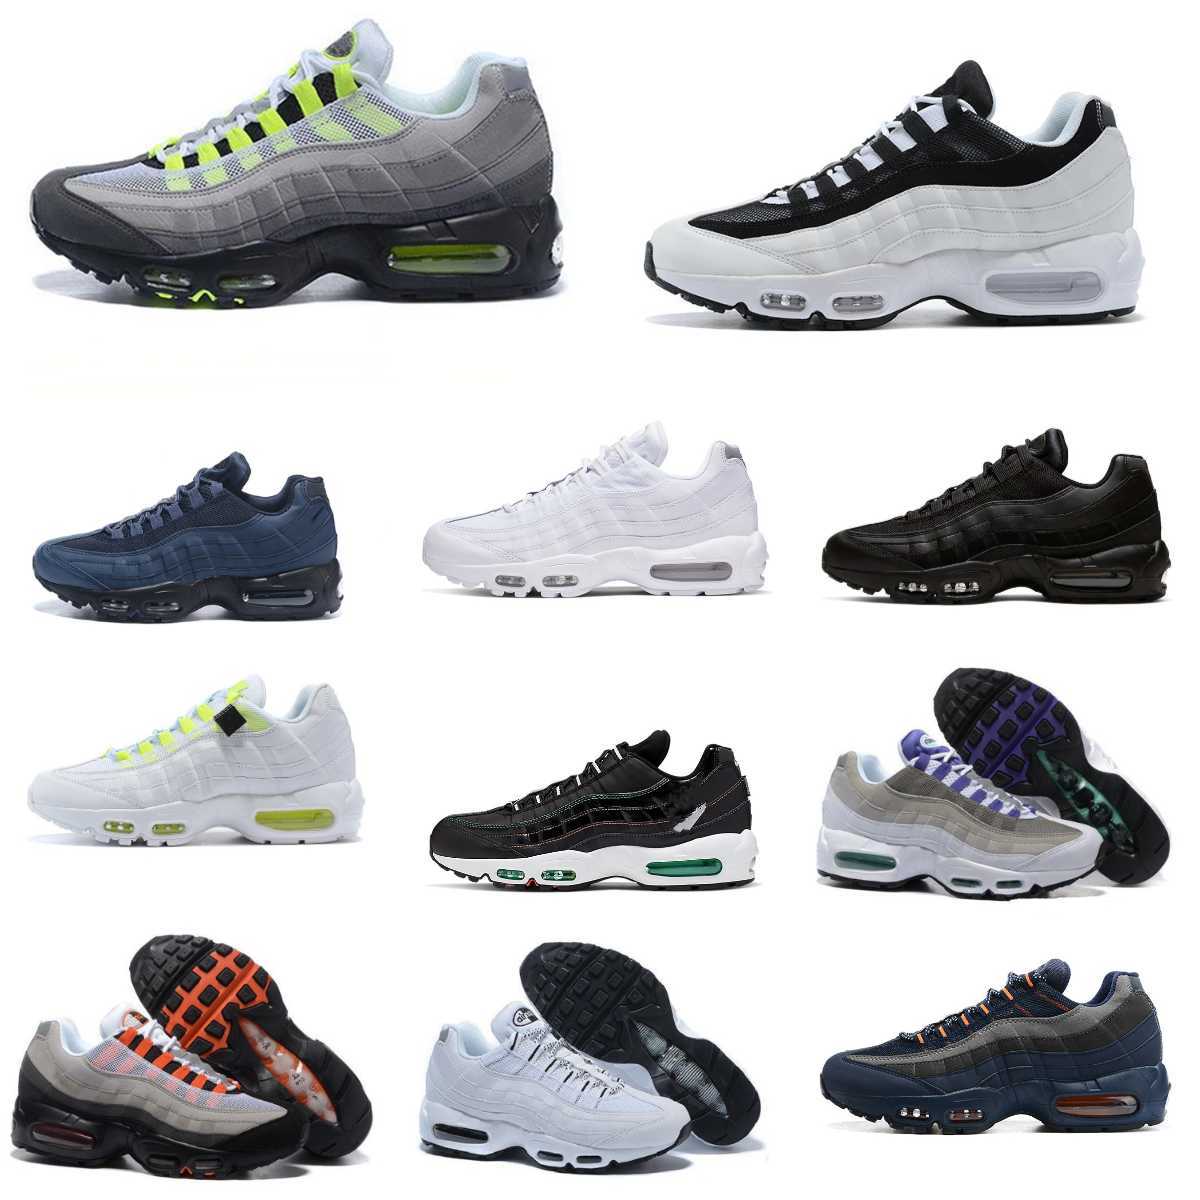 

2023 Top Quality Mens Running Shoes 95 Yin Yang Neon Laser Fuchsia Red Greedy 3.0 OG Airs Solar Triple Black White Worldwide Seahawks Particle Grey Sports Sneakers S26, Please contact us